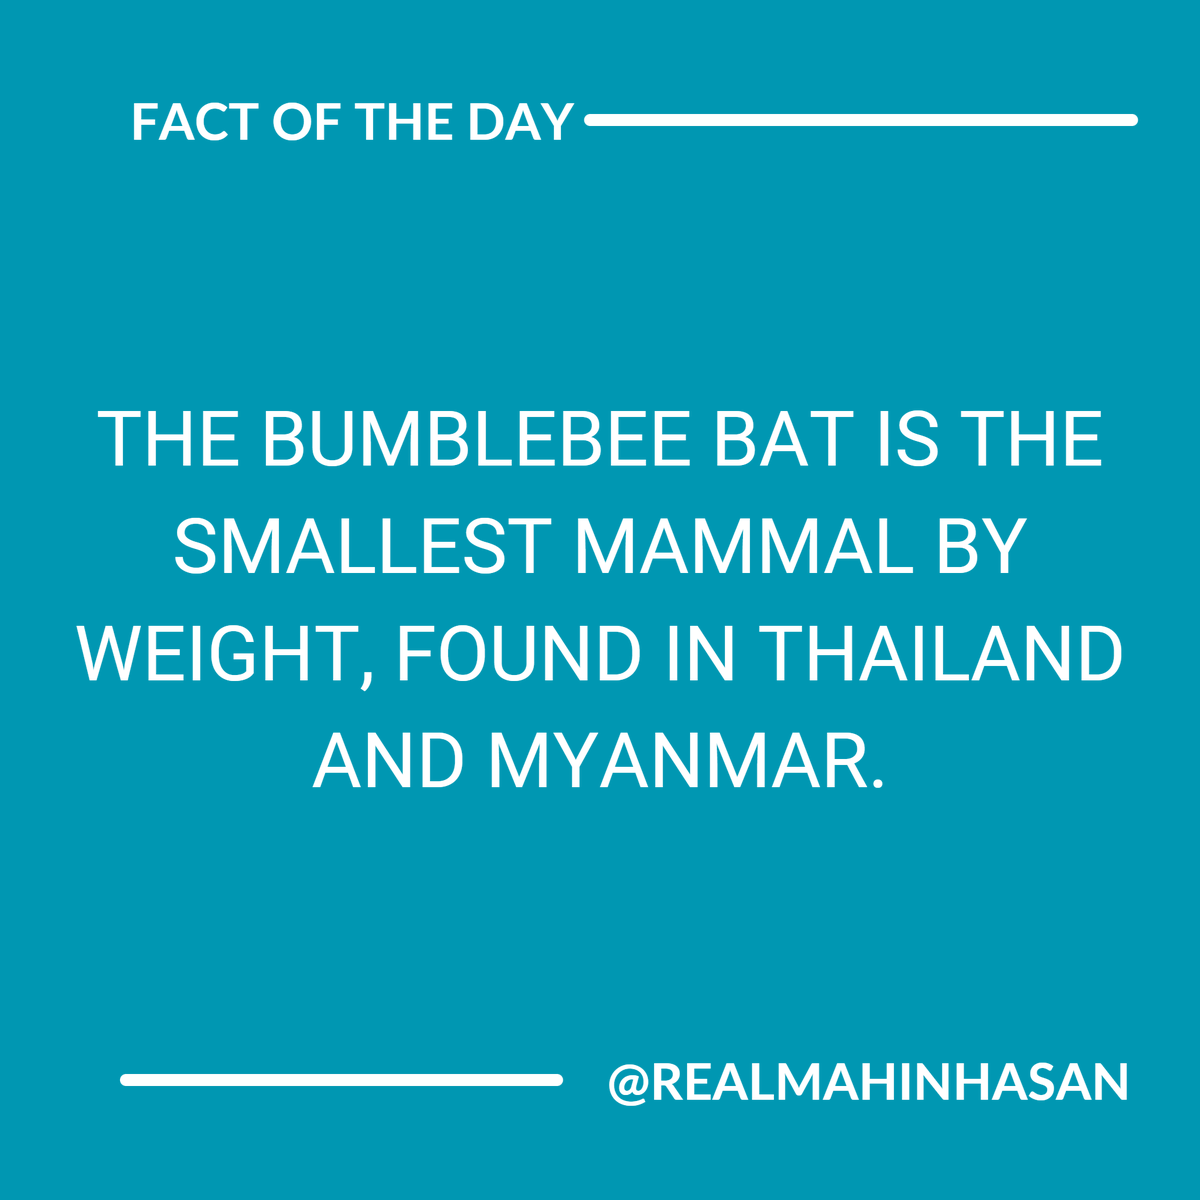 The world's smallest mammal is the bumblebee bat, weighing about 2 grams. 

#TinyAnimals #BumblebeeBat